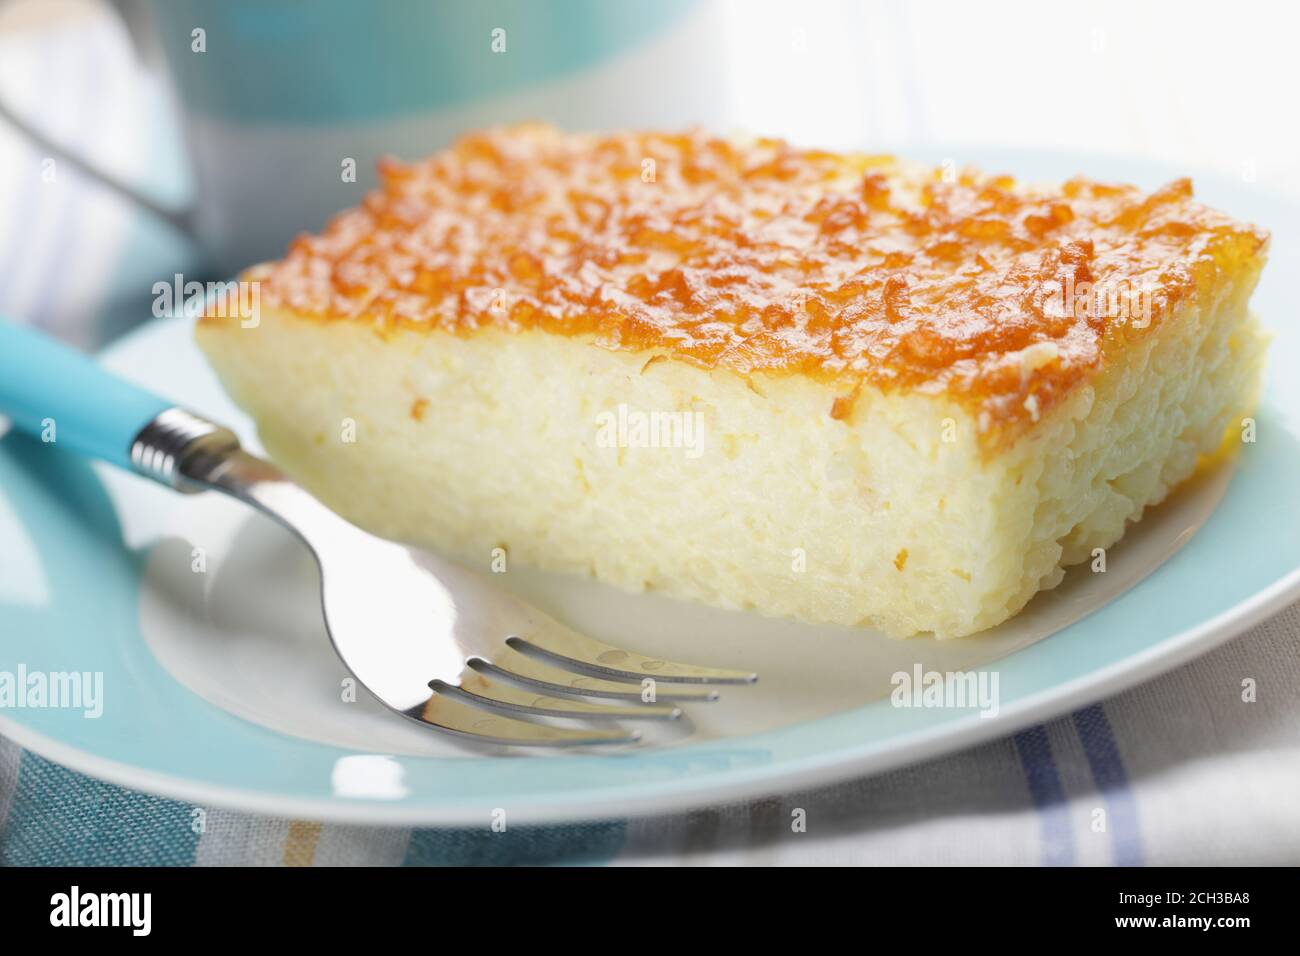 Slice of rice pudding on a plate closeup Stock Photo